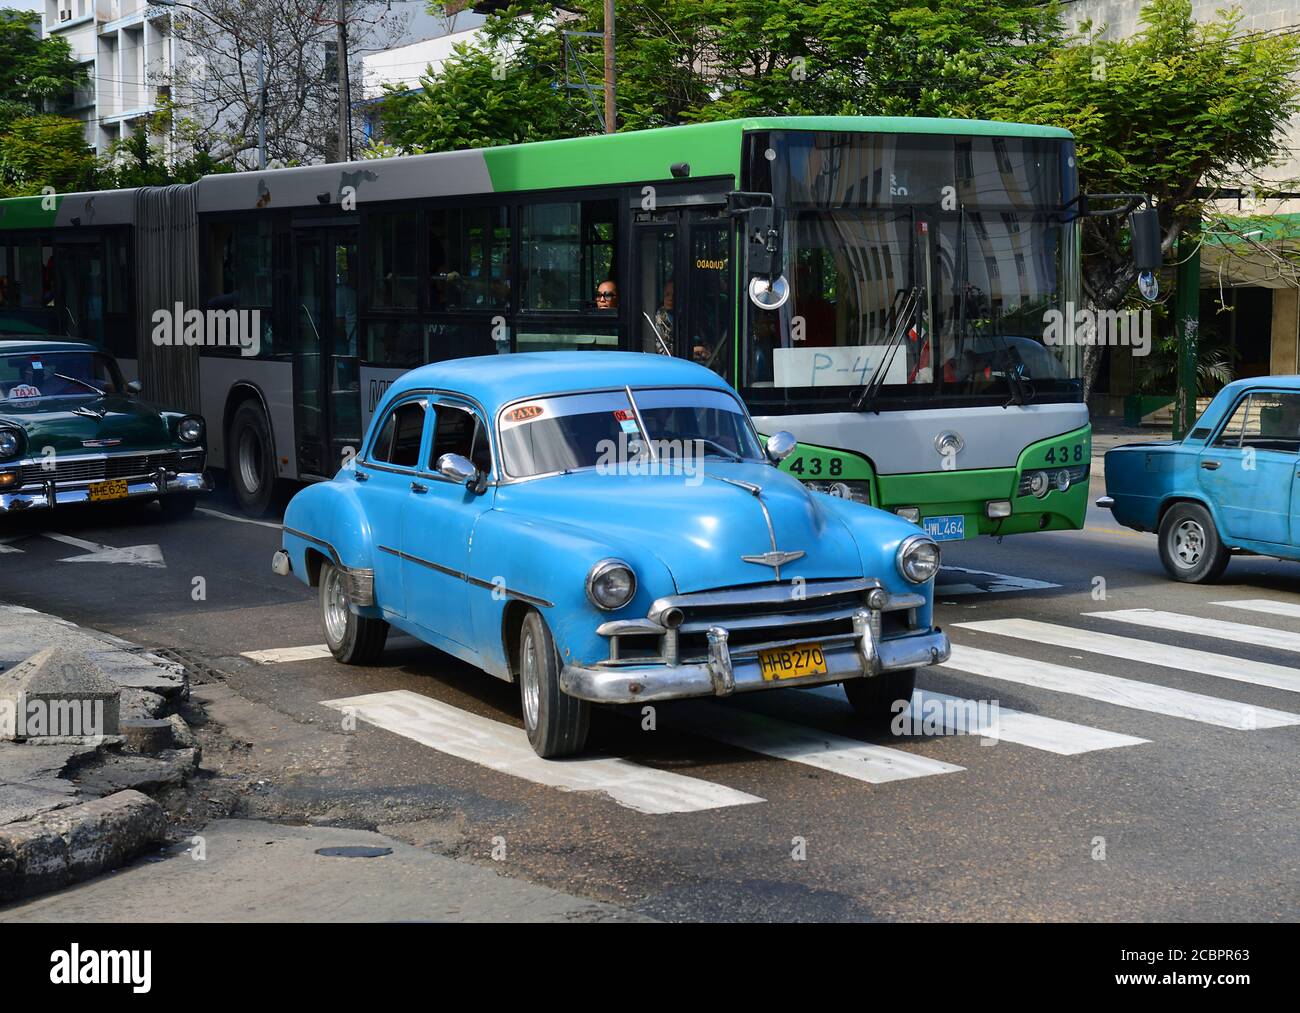 HAVANA, CUBA - Mar 07, 2013: Blue American car in Havana dating from 1950s being used as taxi. This is typical of many cars still being driven in Cuba Stock Photo